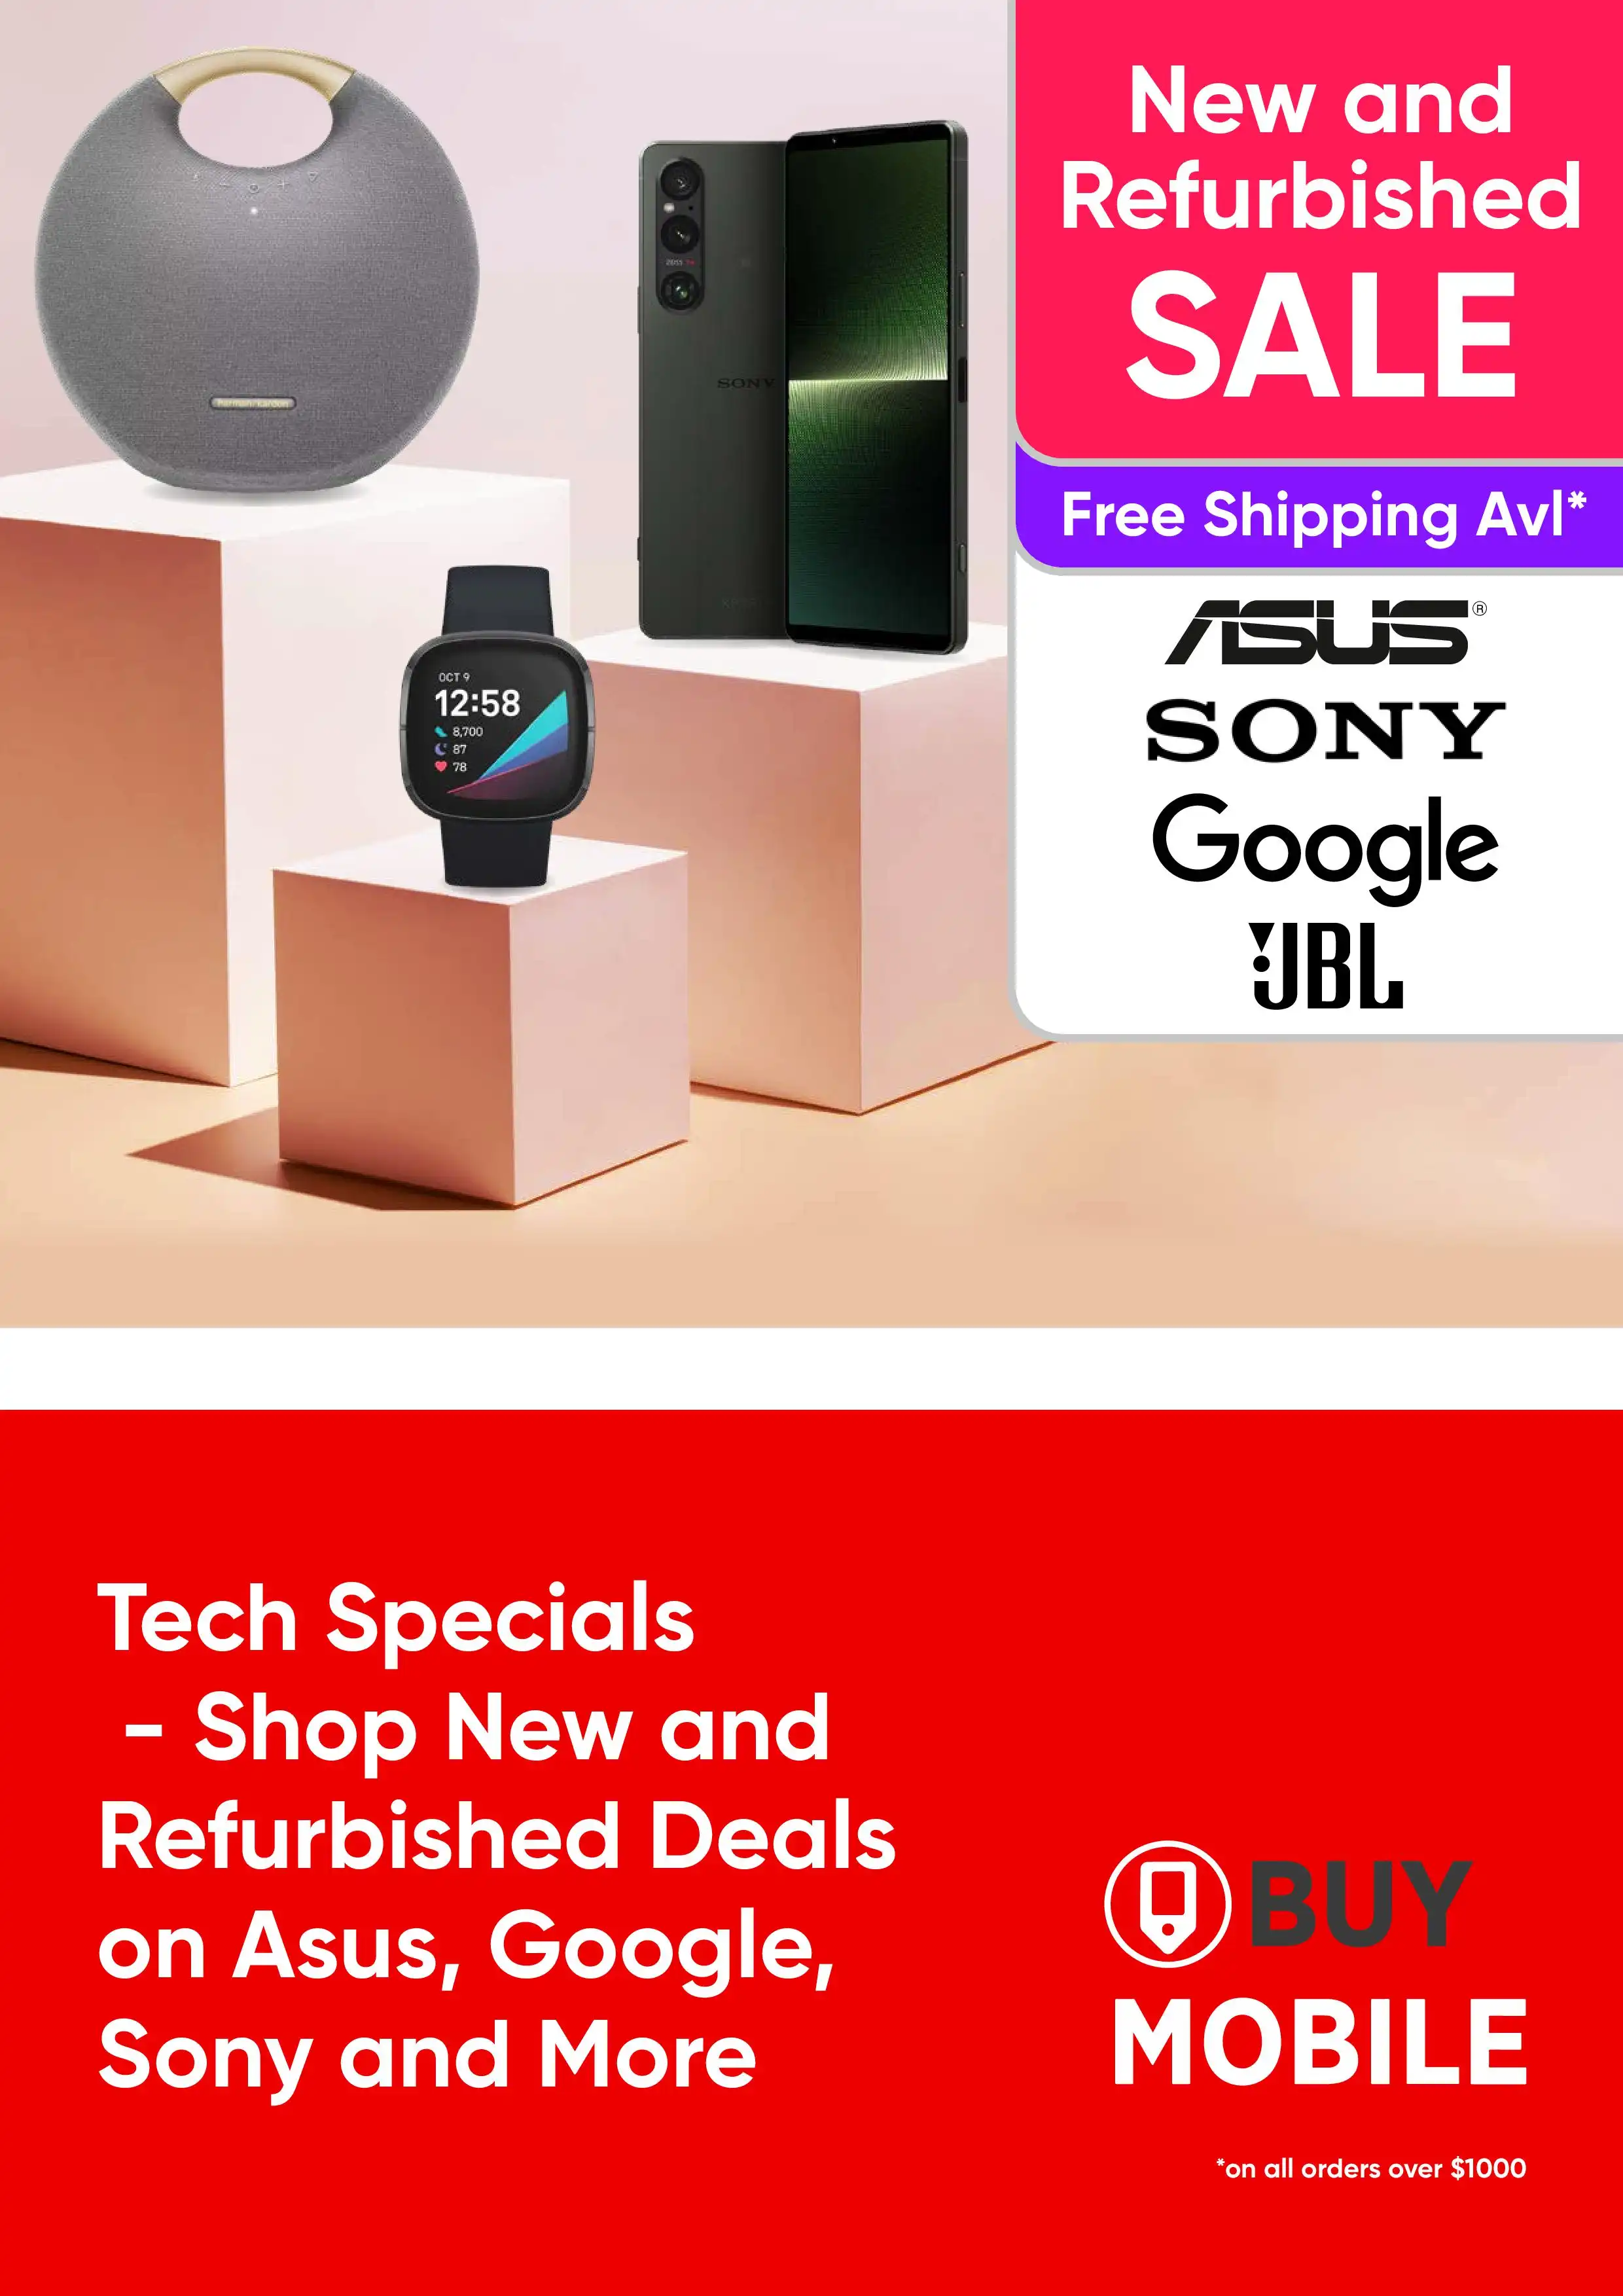 Tech Specials Savers - Shop New and Refurbished Deals on Asus, Google, Sony and More